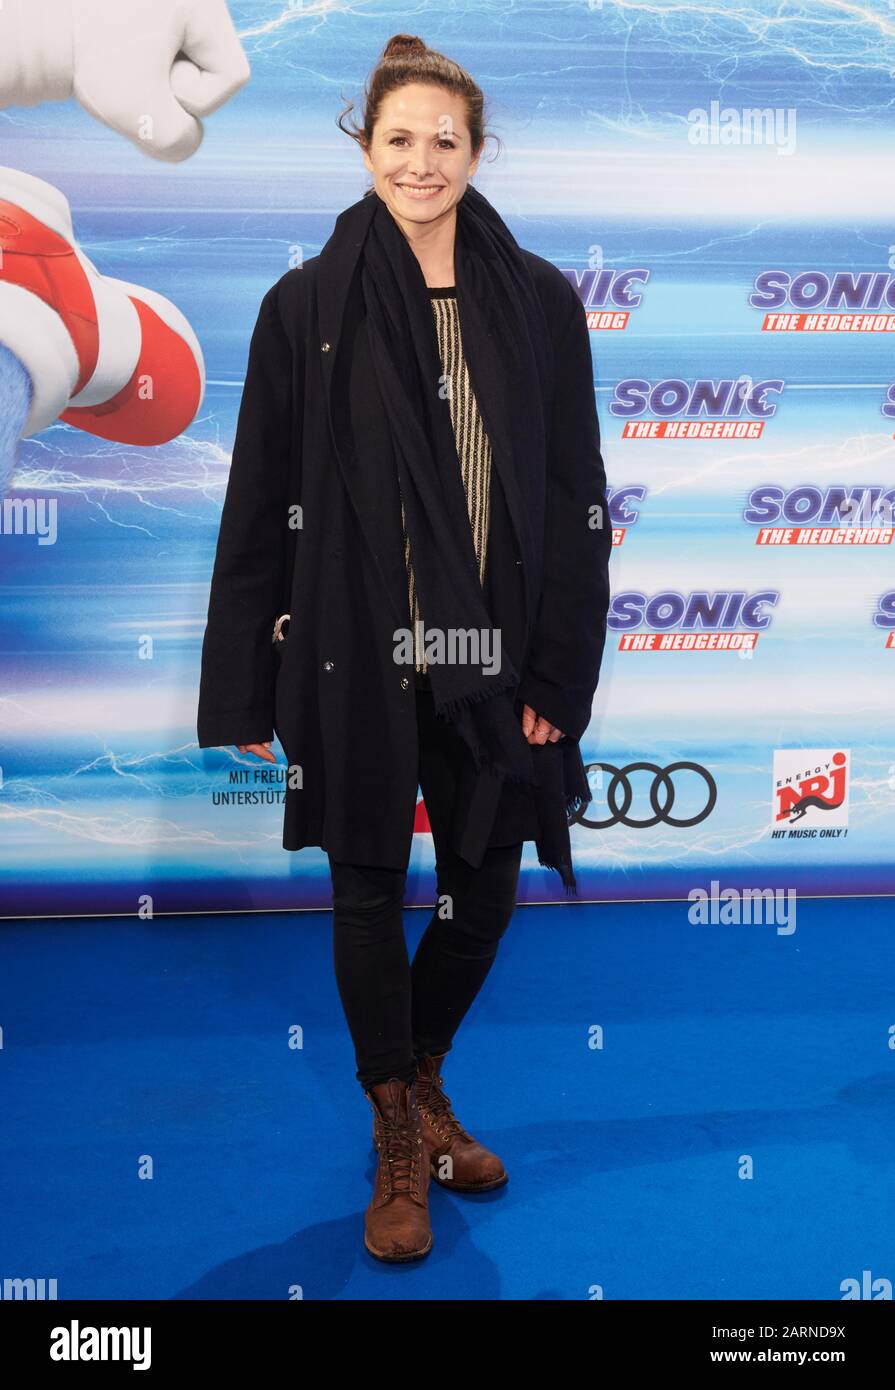 Berlin, Germany. 28th Jan, 2020. Actress Ellenie Salvo González comes to the premiere of the film 'Sonic The Hedgehog' at the Zoo Palast. Credit: Annette Riedl/dpa/Alamy Live News Stock Photo